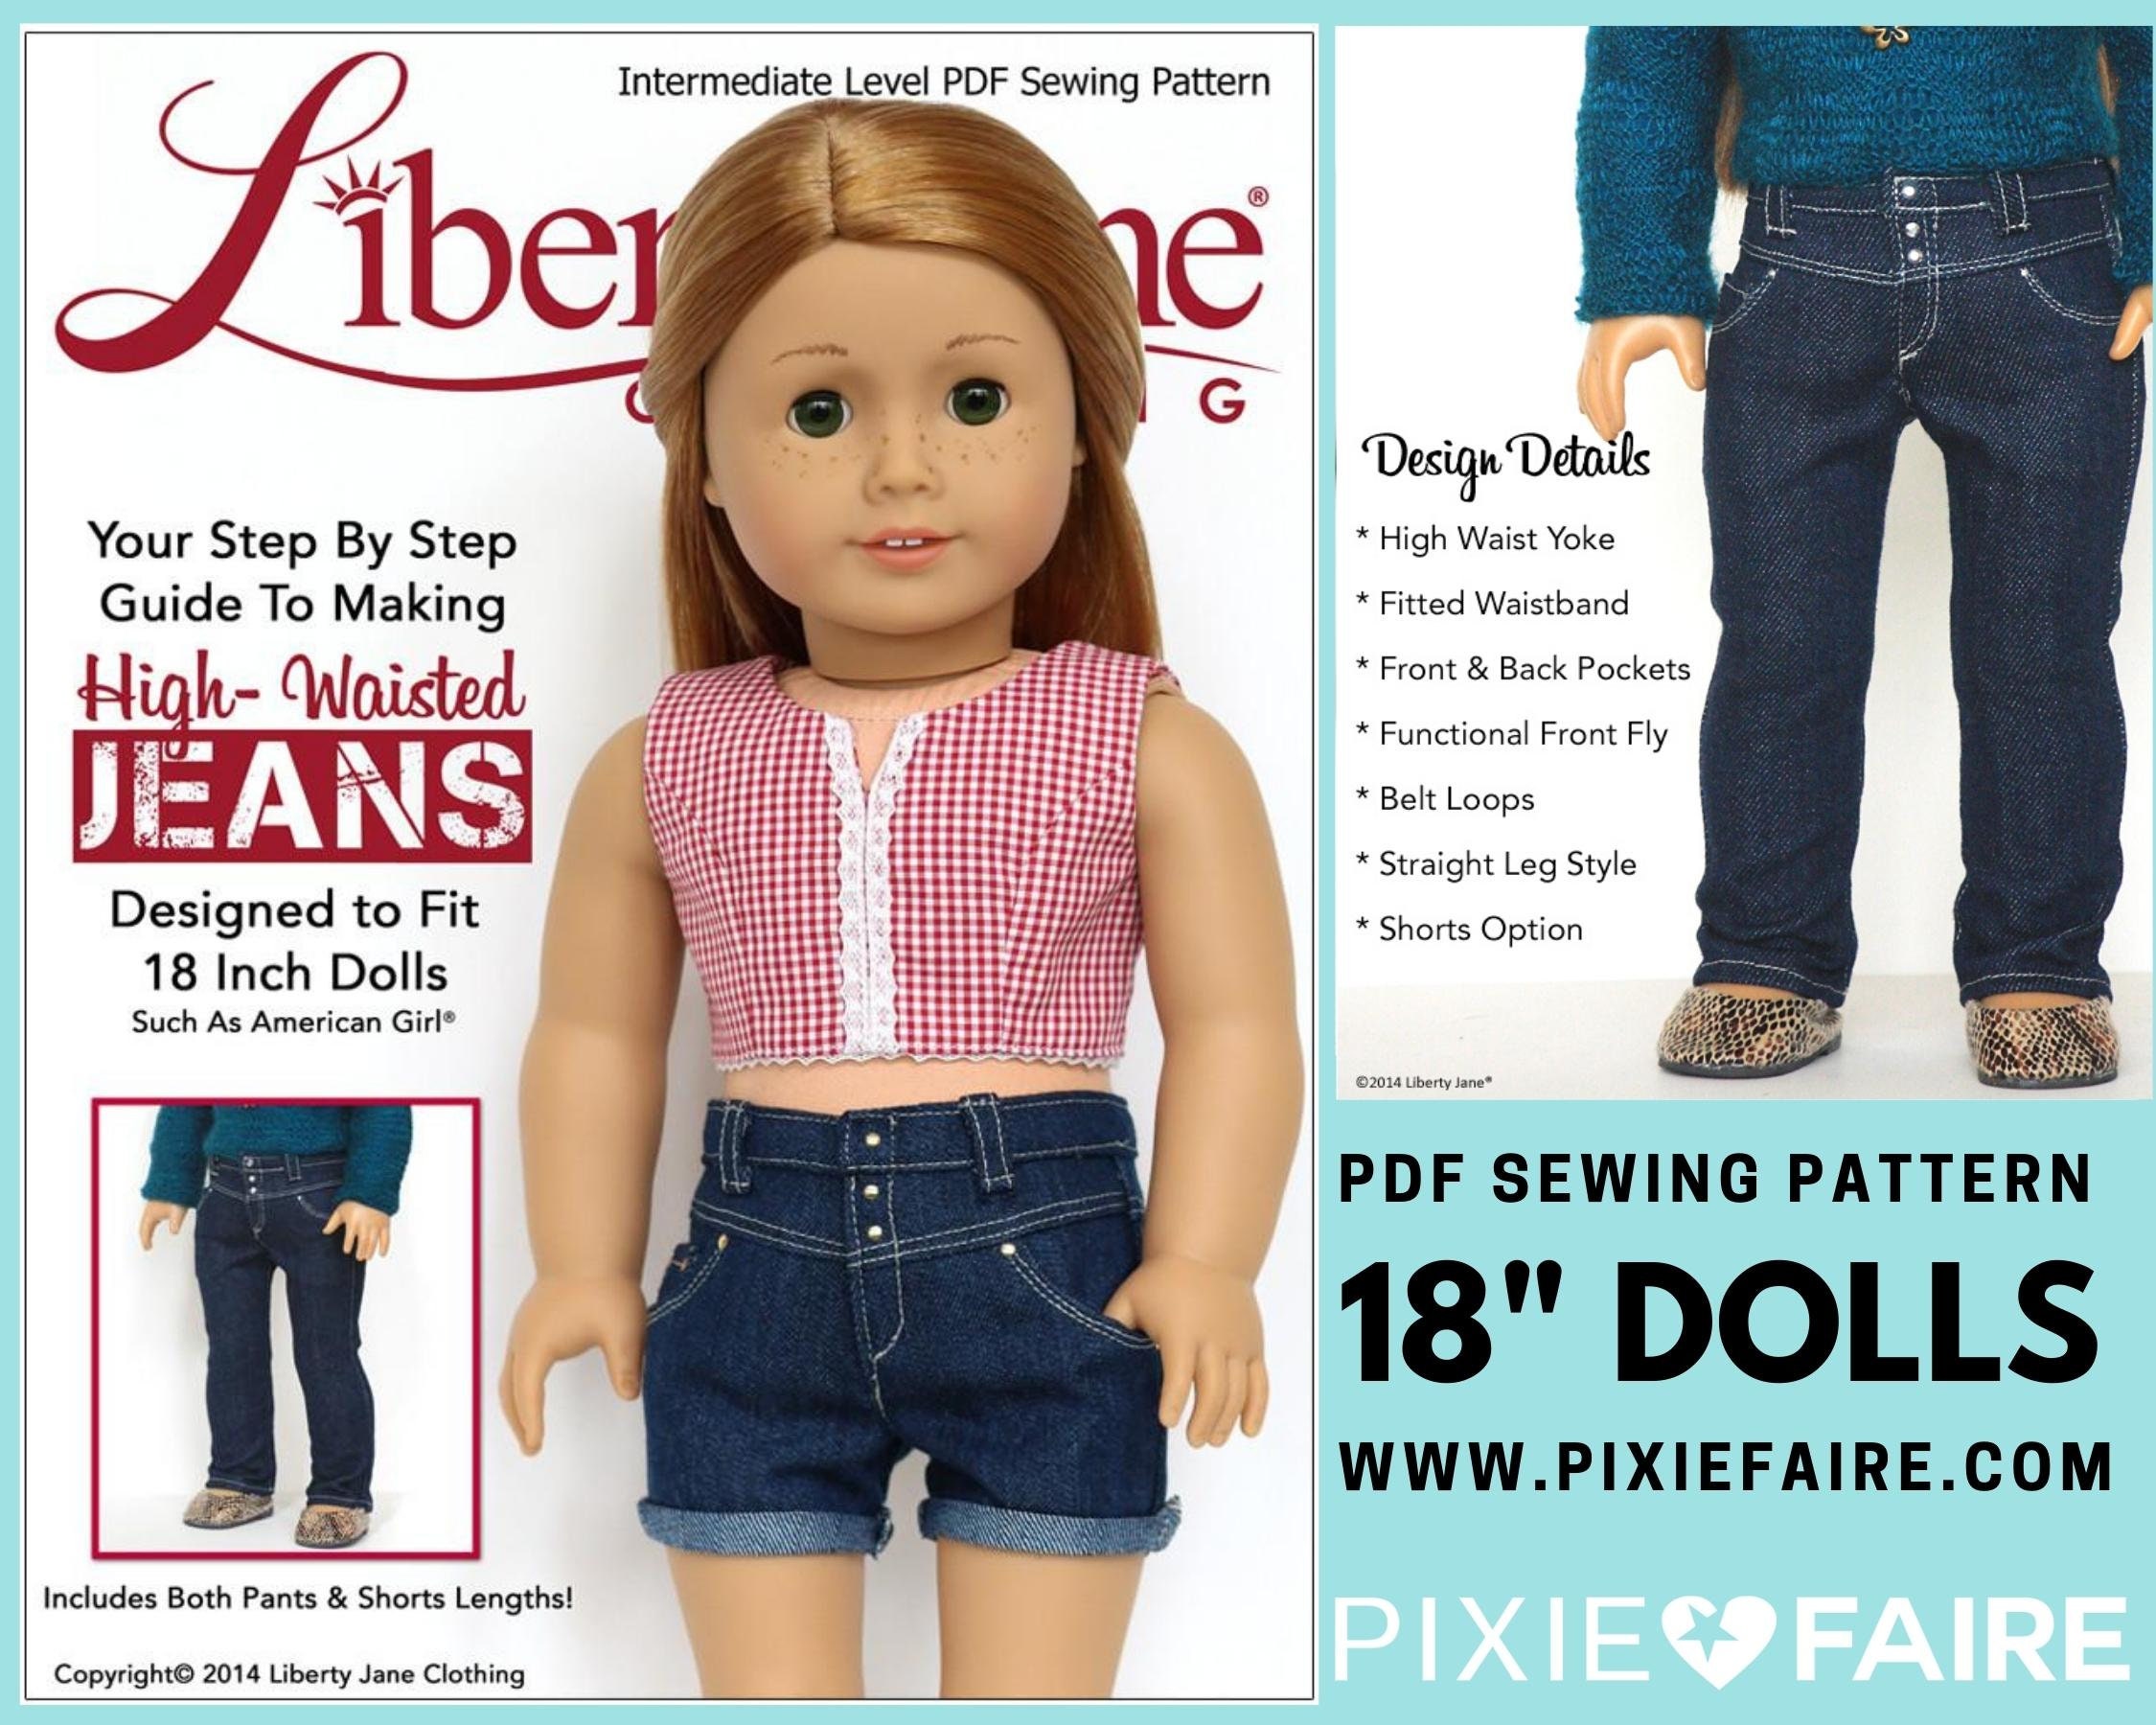 Prima Bells Princess Seamed Pants 18 Inch Doll Clothes Pattern Fits Dolls  Such as American Girl® Dkinley Designs PDF Pixie Faire 